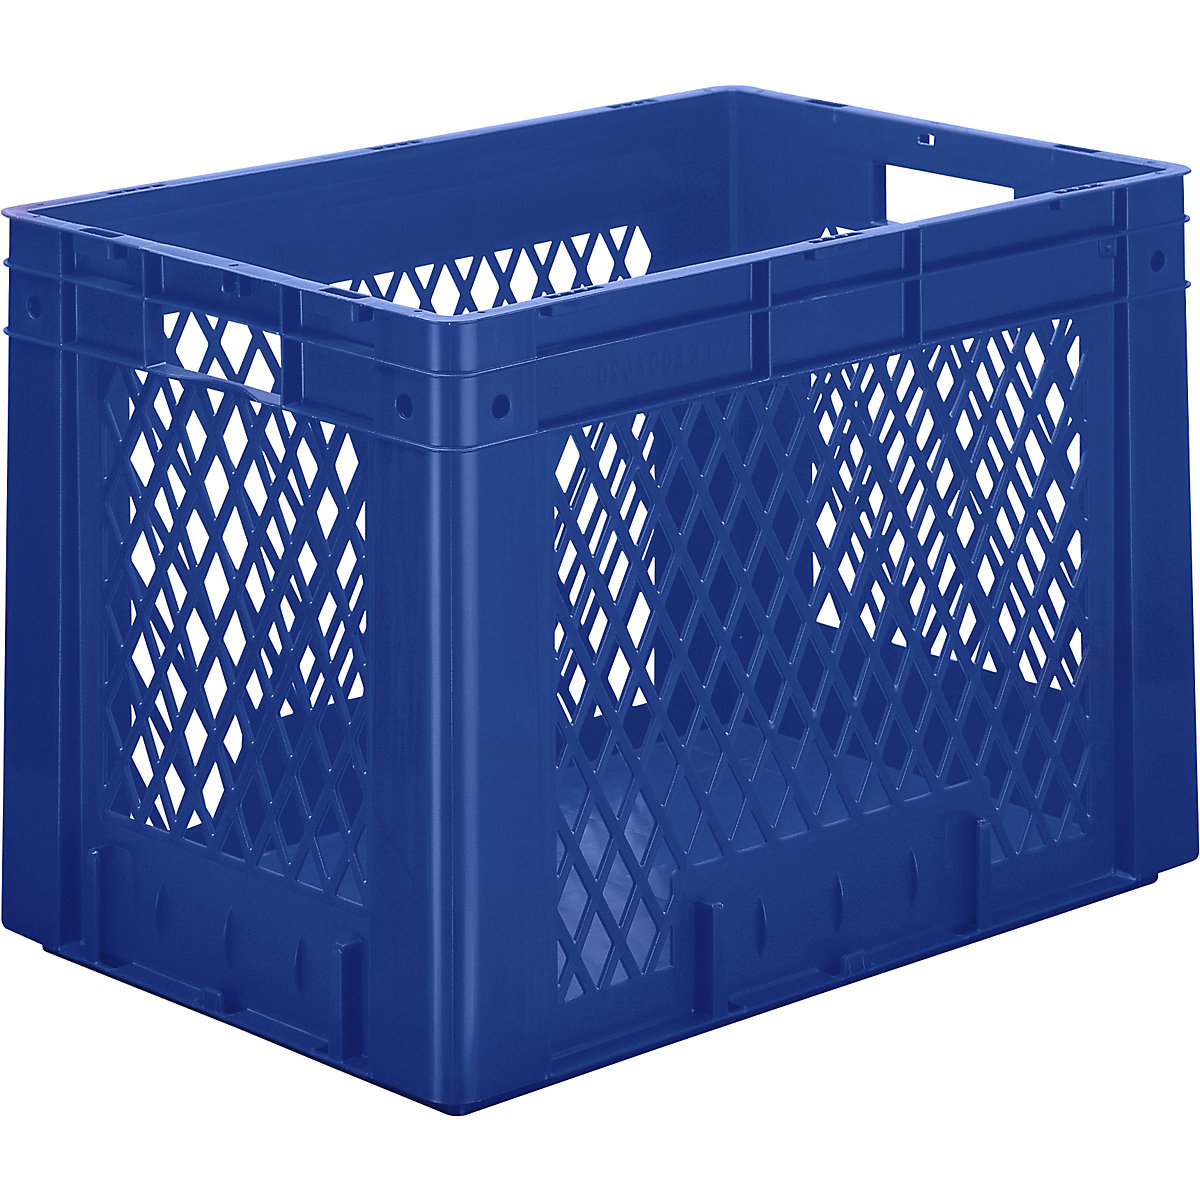 Heavy duty Euro container, polypropylene, capacity 80 l, LxWxH 600 x 400 x 420 mm, perforated walls, solid base, blue, pack of 2-3